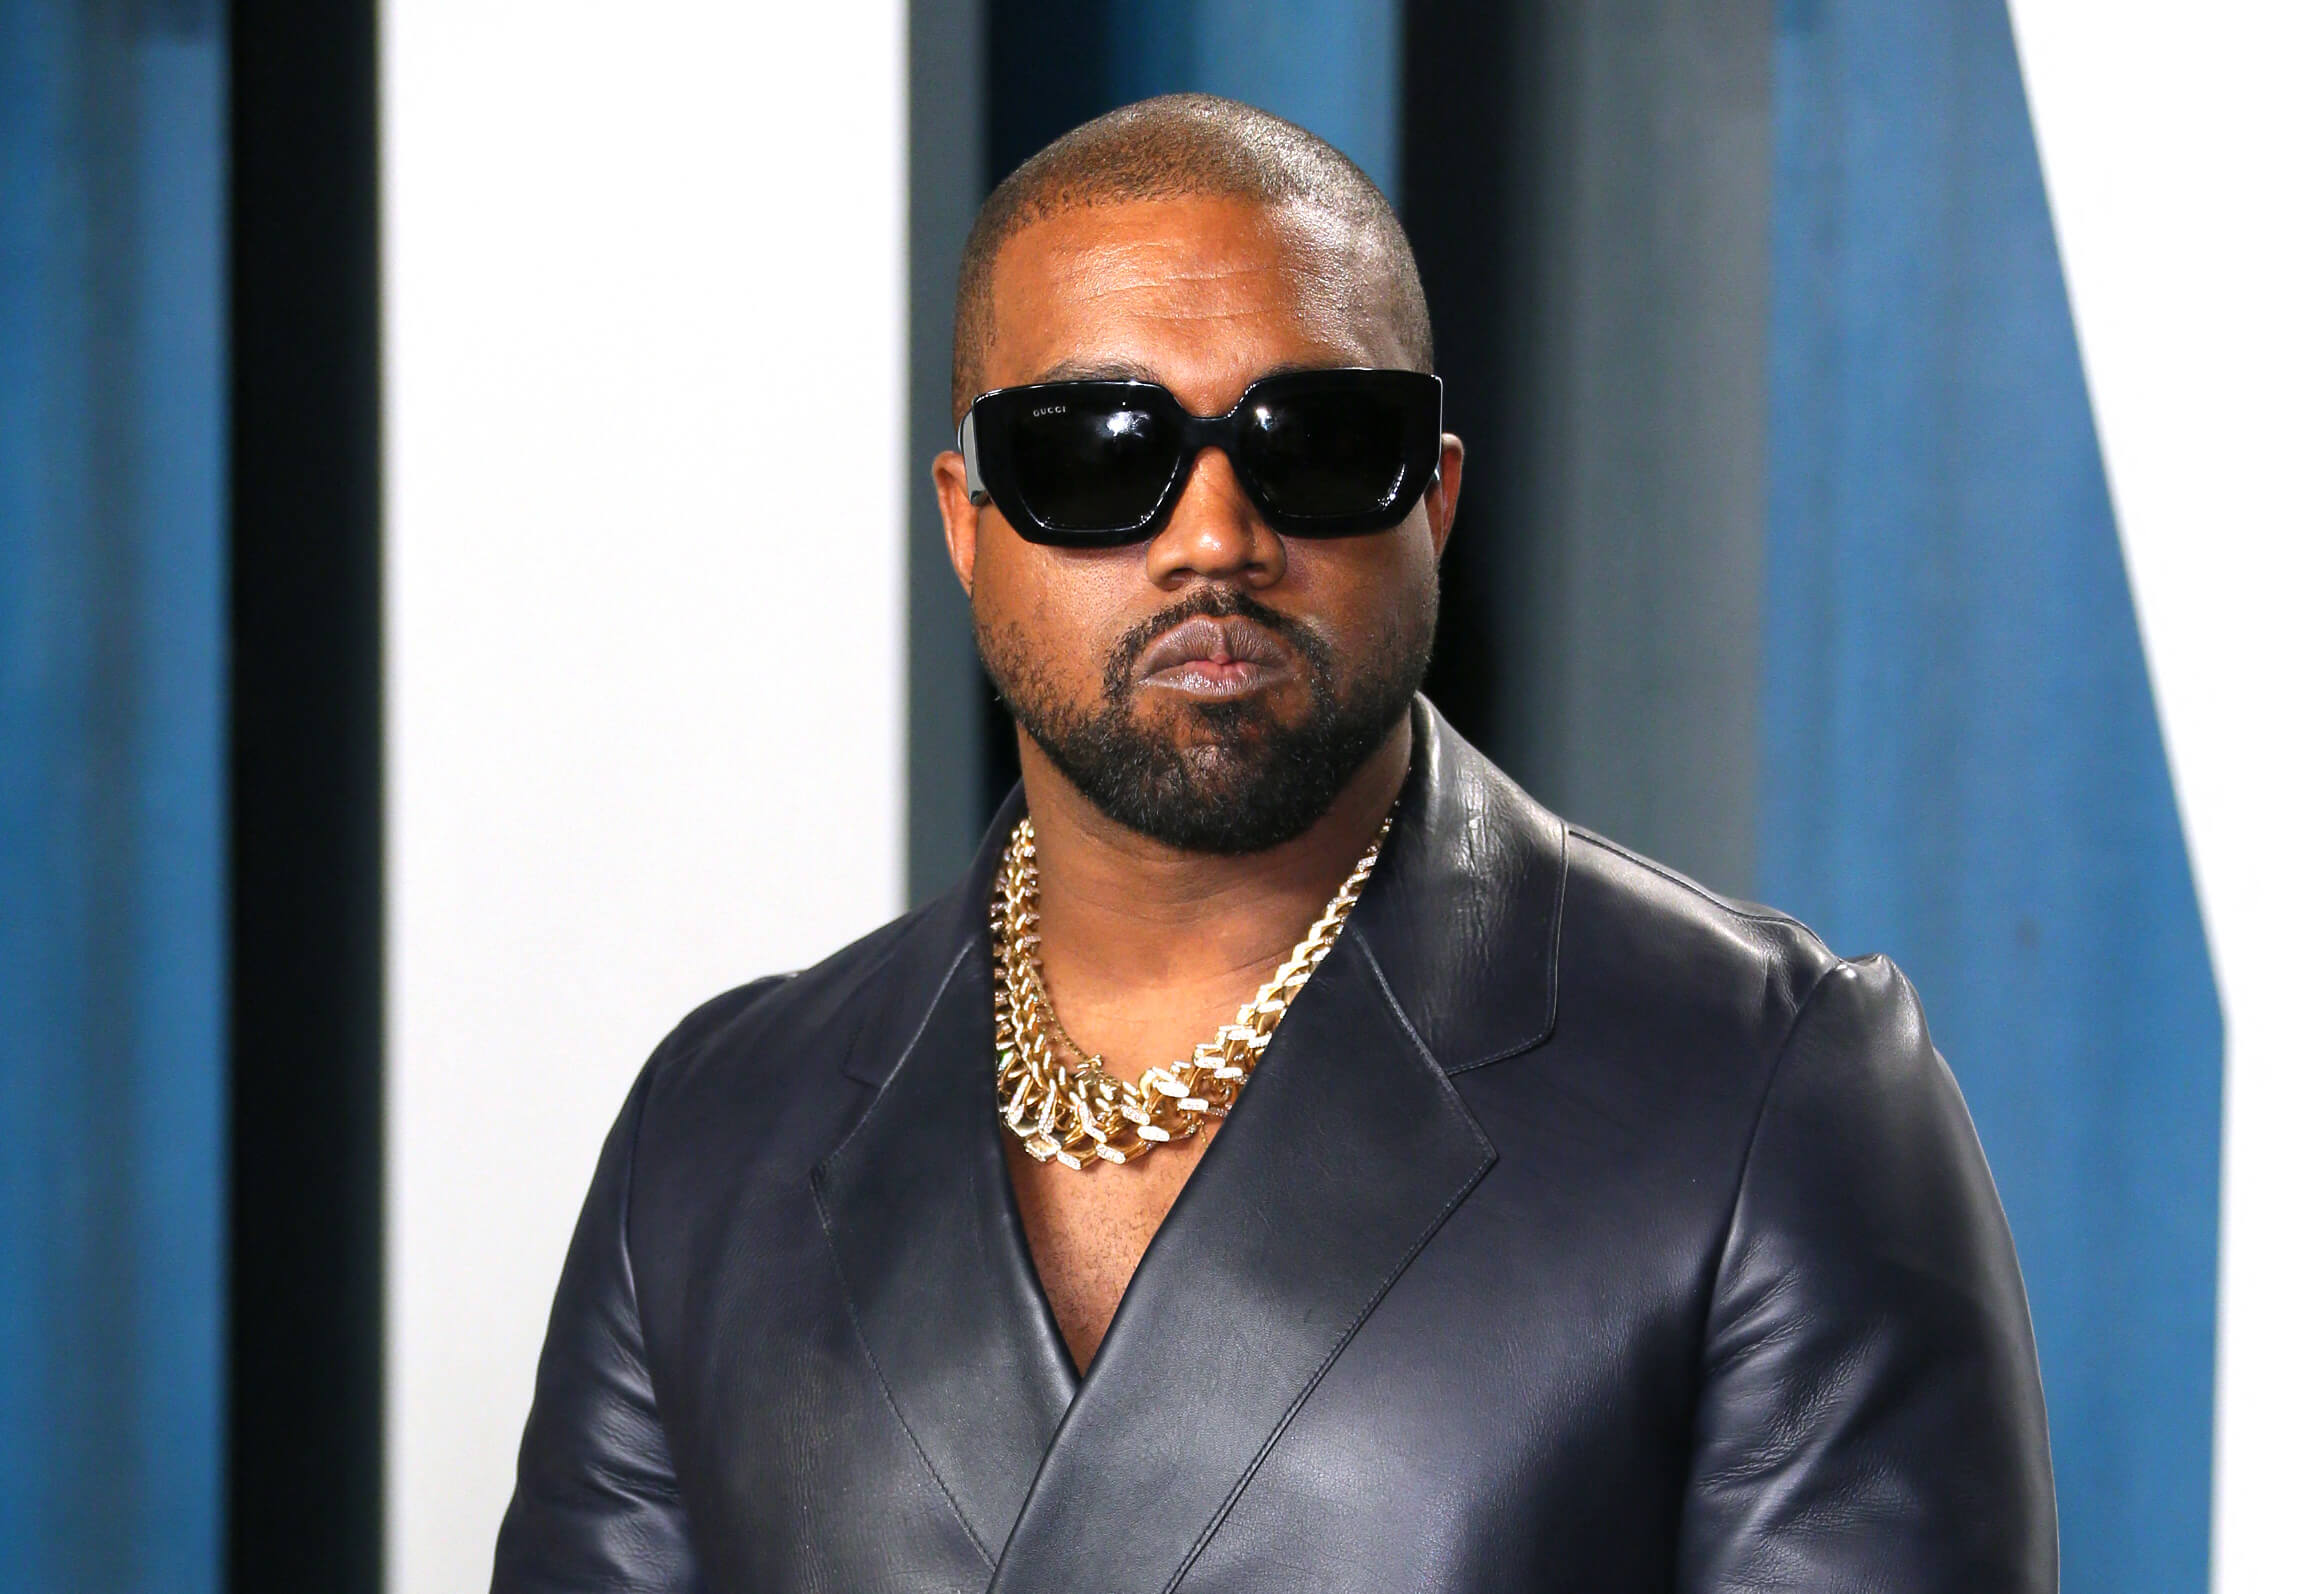 What do Black Jews say about the Kanye mess? Plenty — but not just about him